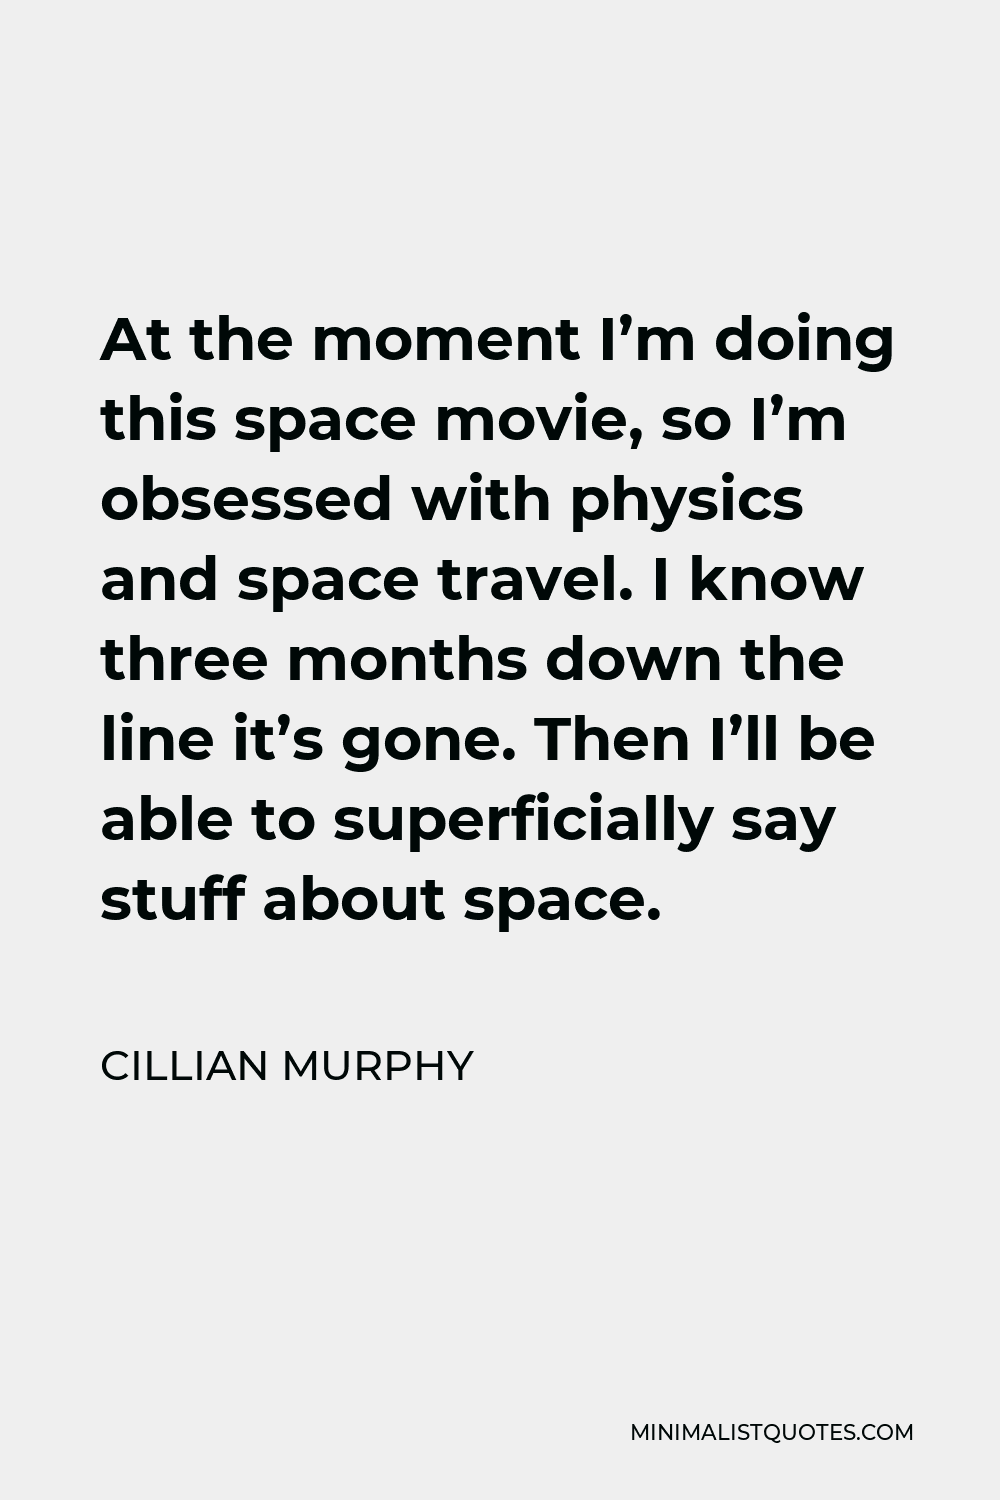 Cillian Murphy Quote - At the moment I’m doing this space movie, so I’m obsessed with physics and space travel. I know three months down the line it’s gone. Then I’ll be able to superficially say stuff about space.